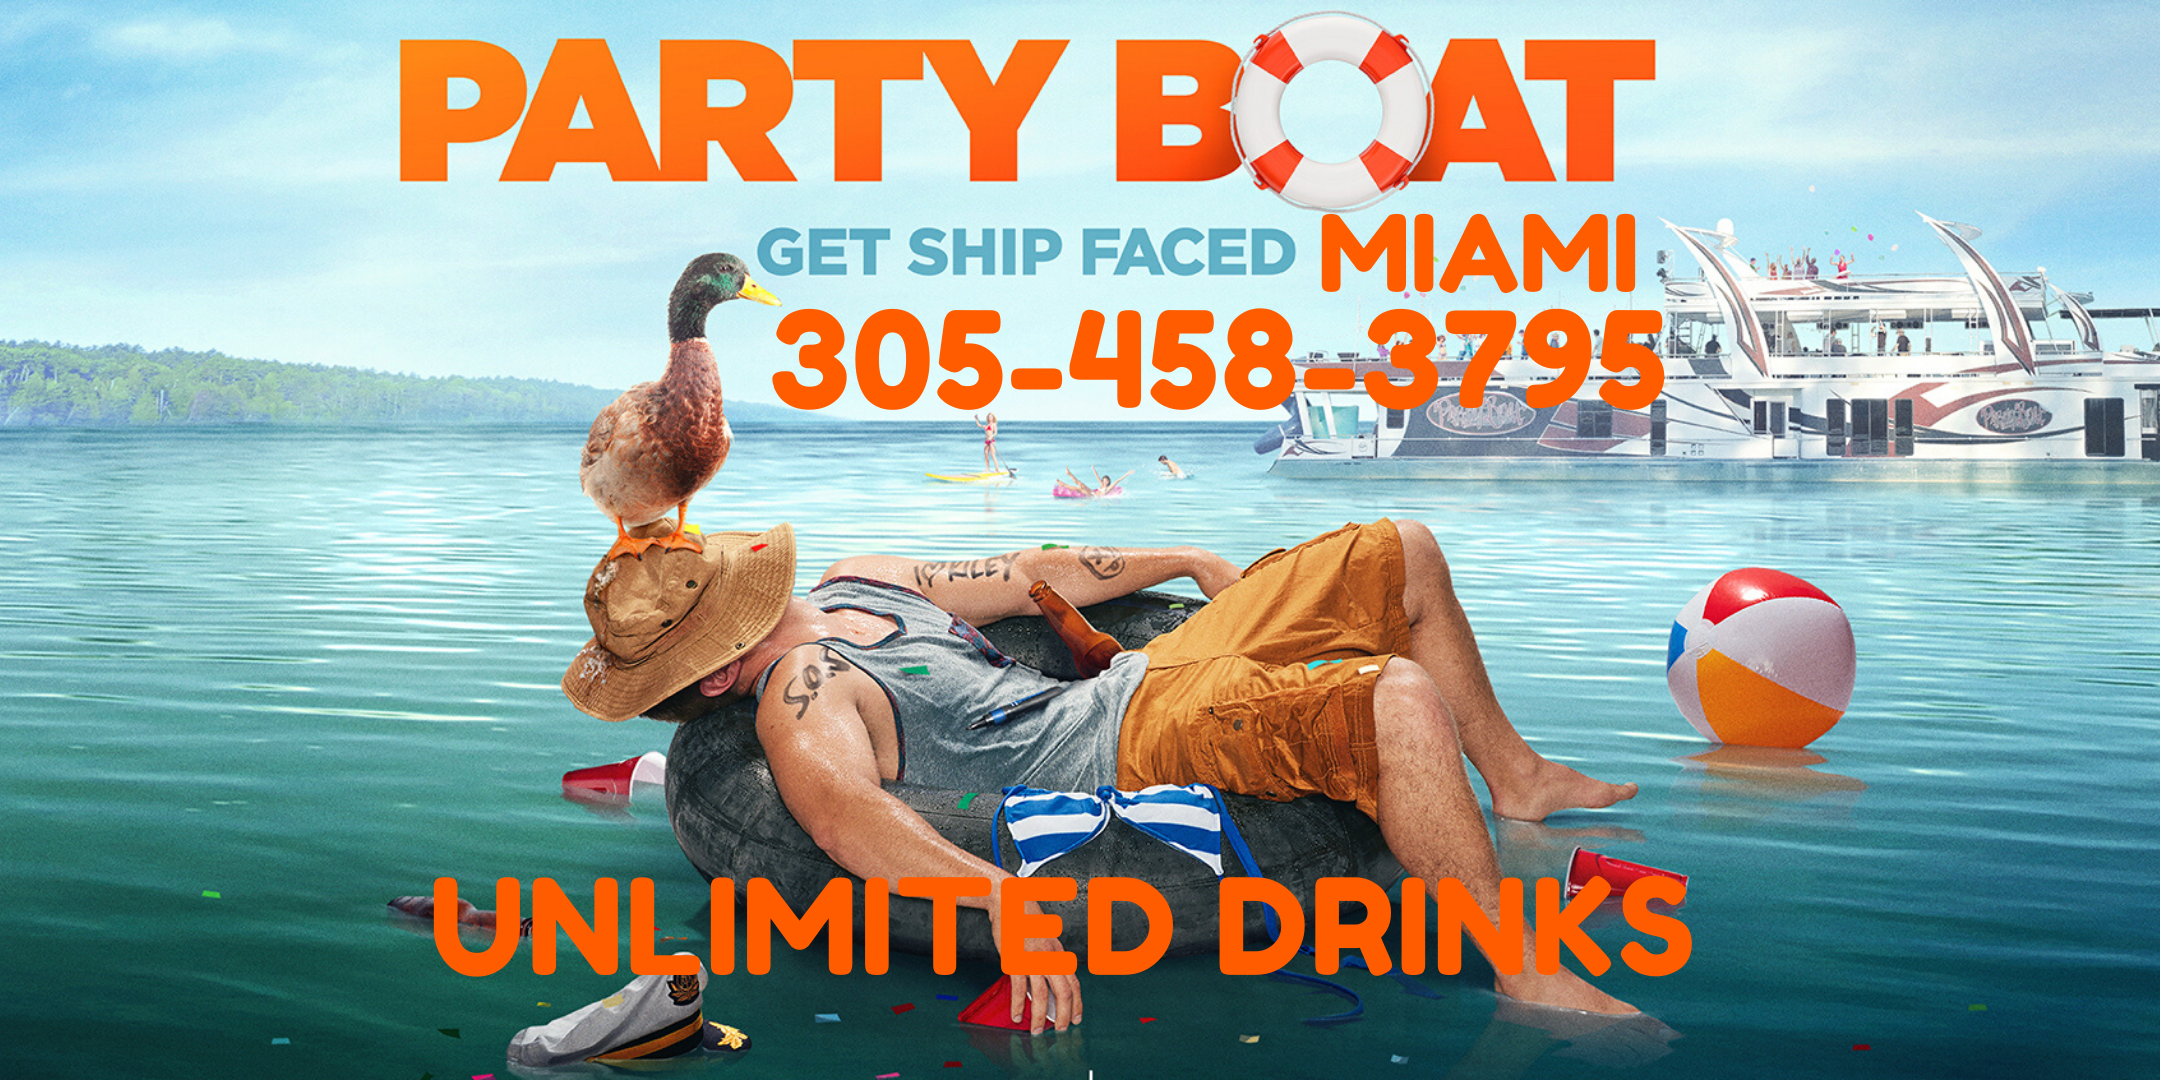 Miami Party Boat 2020 -Unlimited drinks included